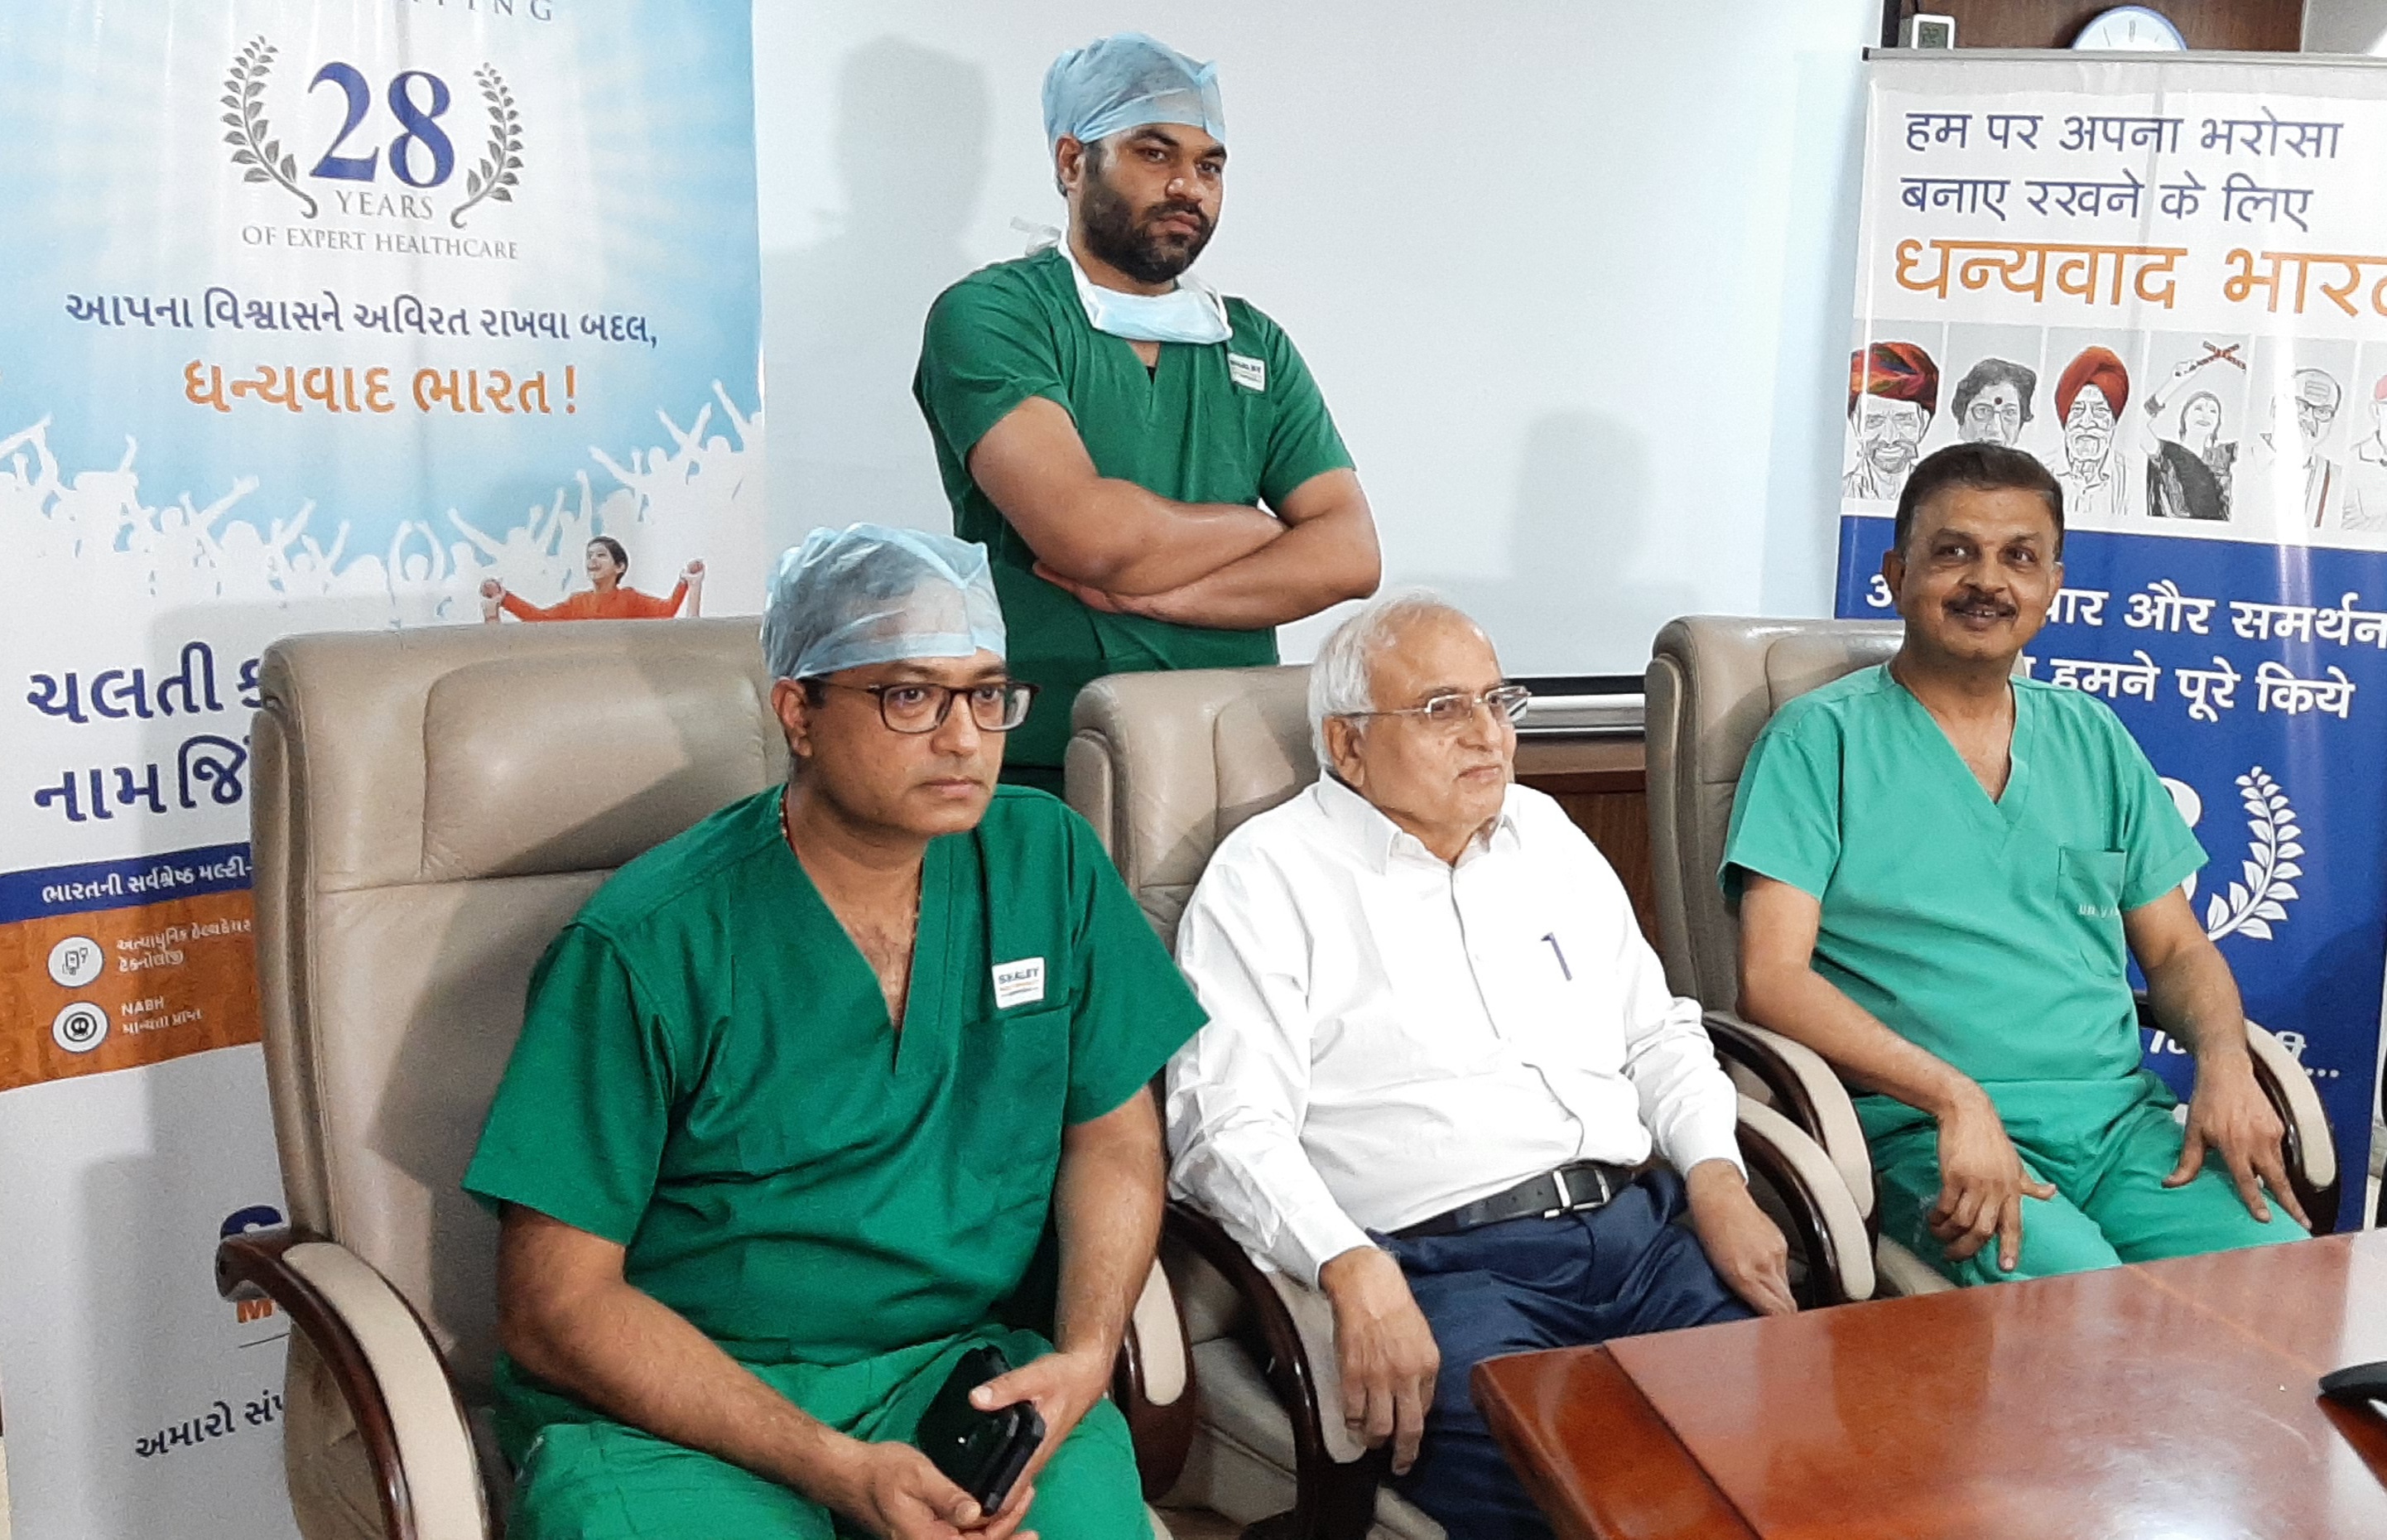 6 Times Failed Revision Hip Replacement Surgery of a Ghana patient performed successfully at Krishna Shalby Hospital Ahmedabad by World-renowned Joint Replacement Surgeon Dr Vikram Shah